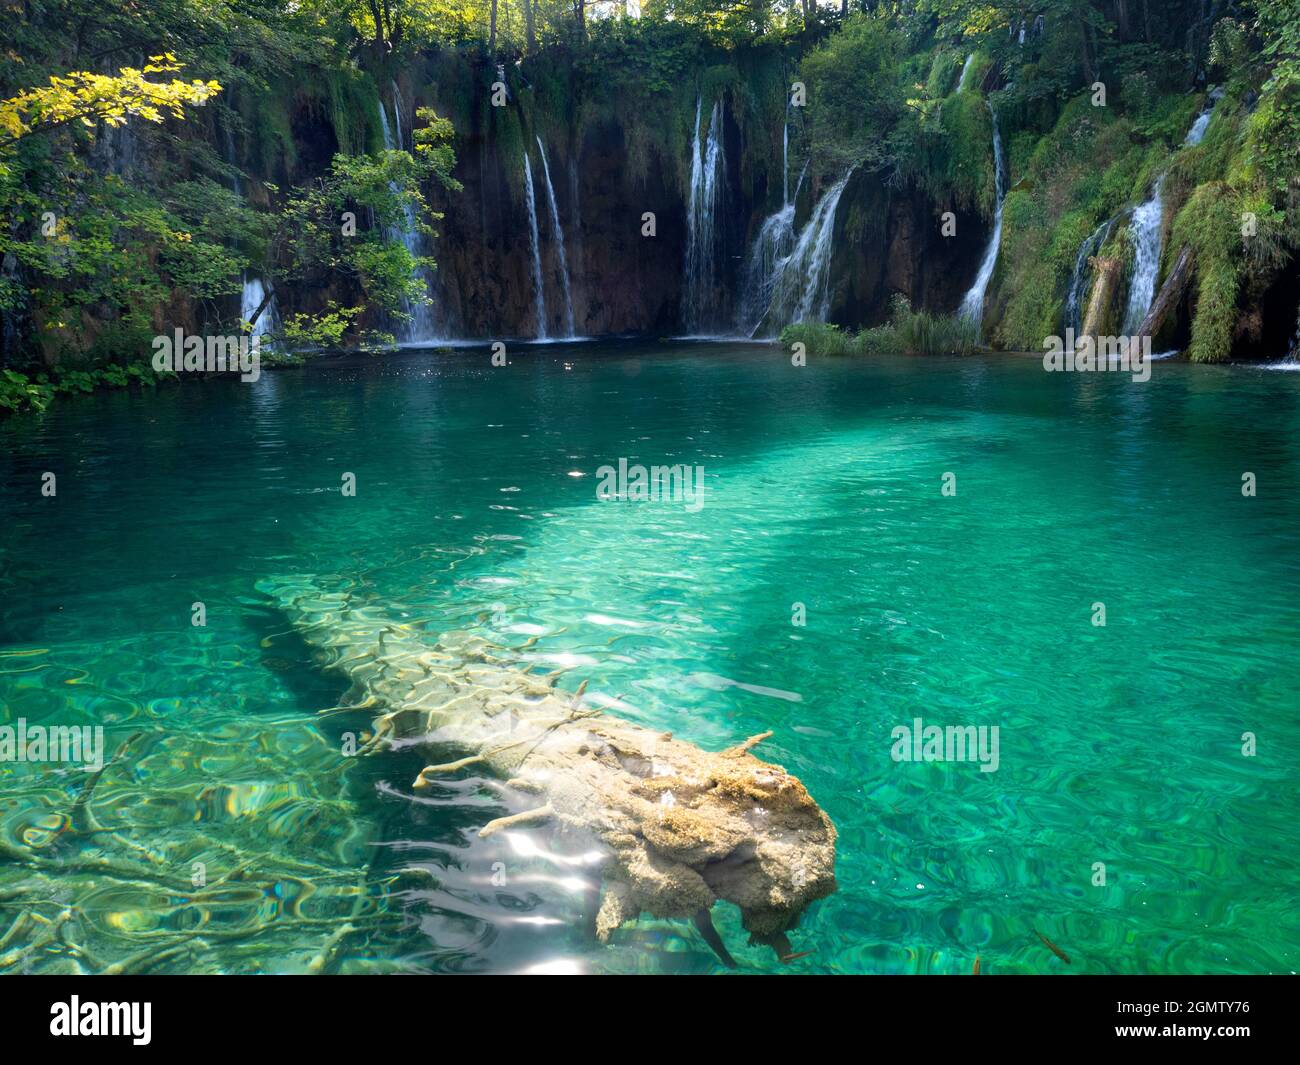 A UNESCO World Heritage Site, Plitvice Lakes National Park is one of the oldest national parks in Southeast Europe and the largest in Croatia. It has Stock Photo